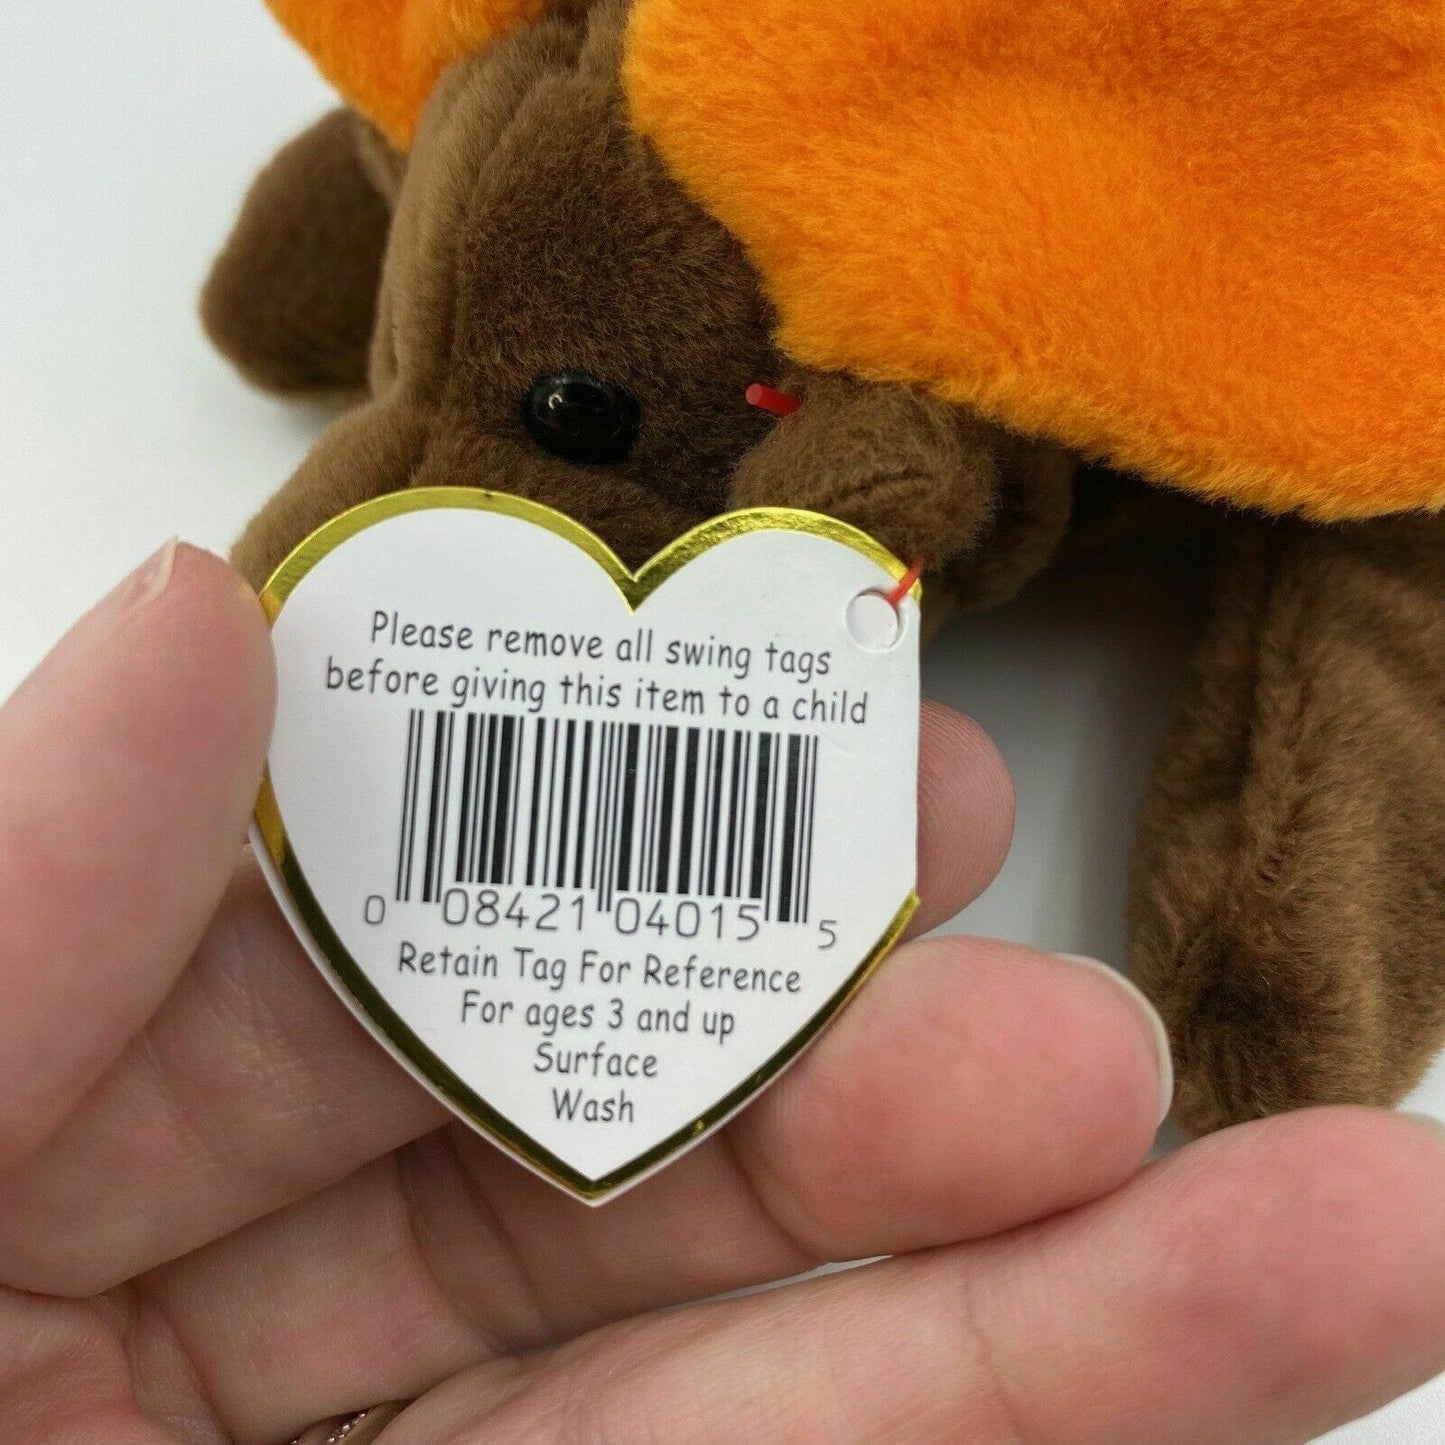 Charming Ty Original Beanie Babies Chocolate The Moose Plush Toy 1993 Excellent Cond. w/ Errors